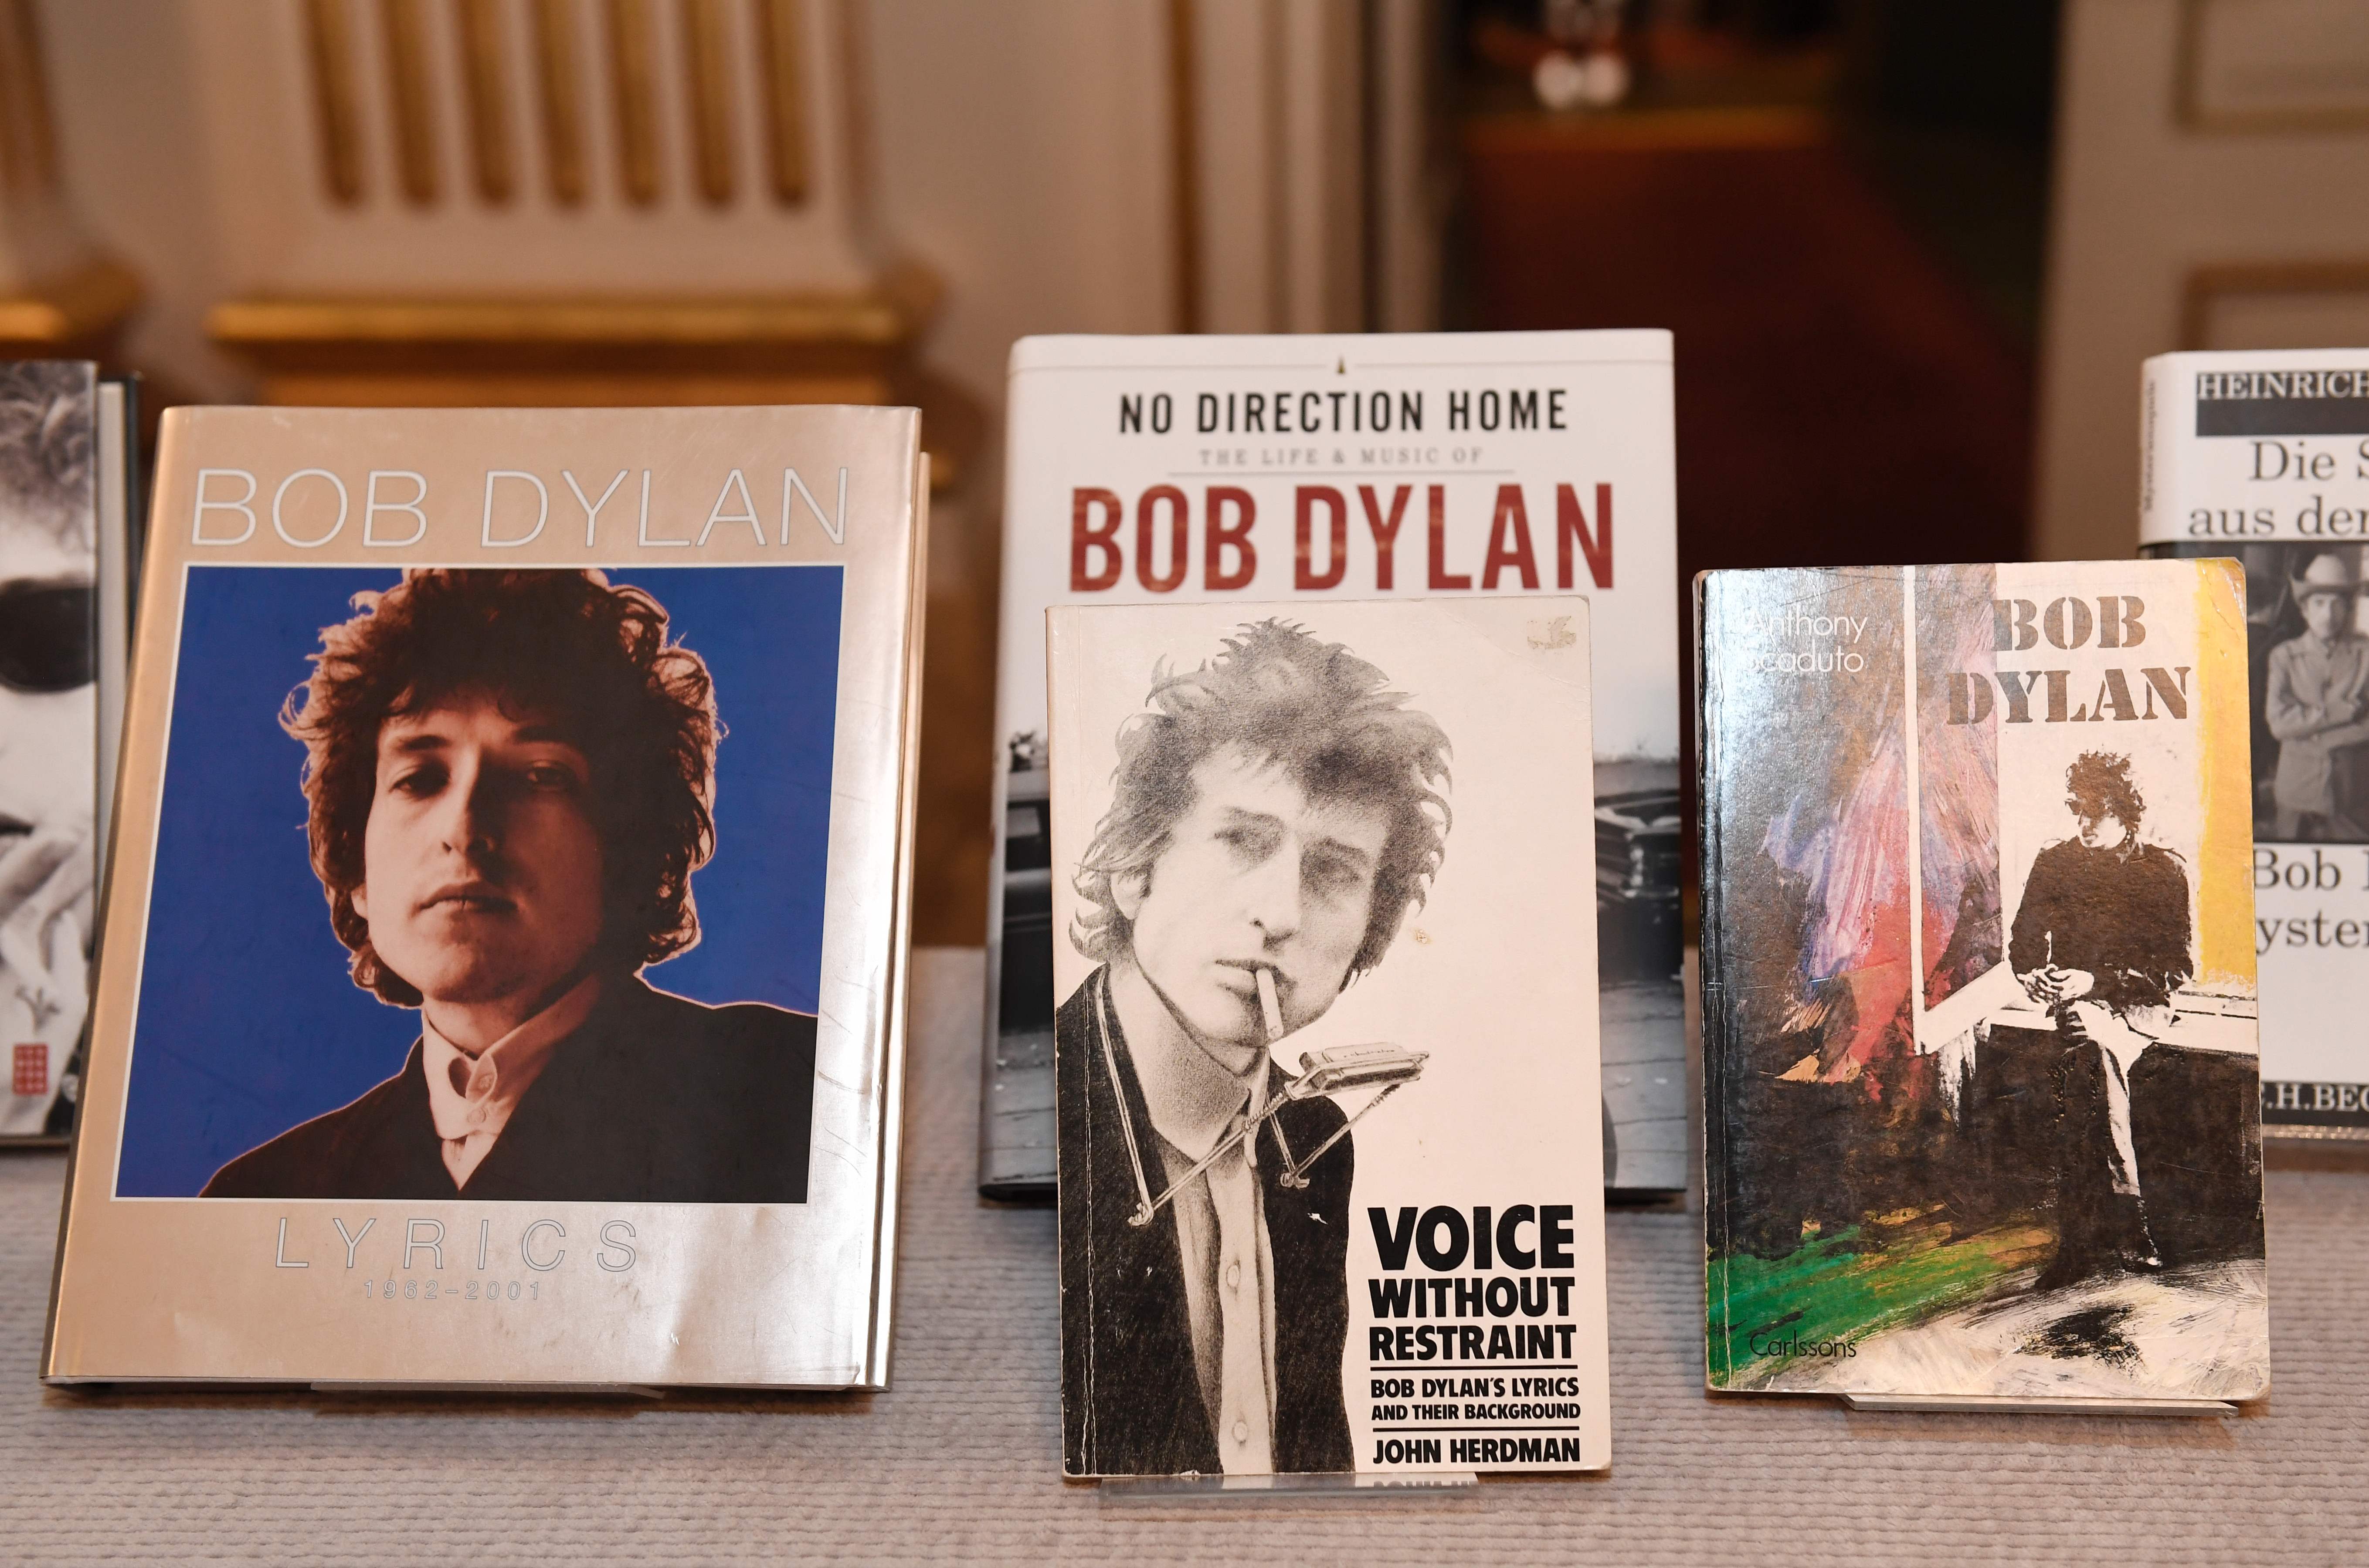 How Bob Dylan surpassed Whitman as the American poet